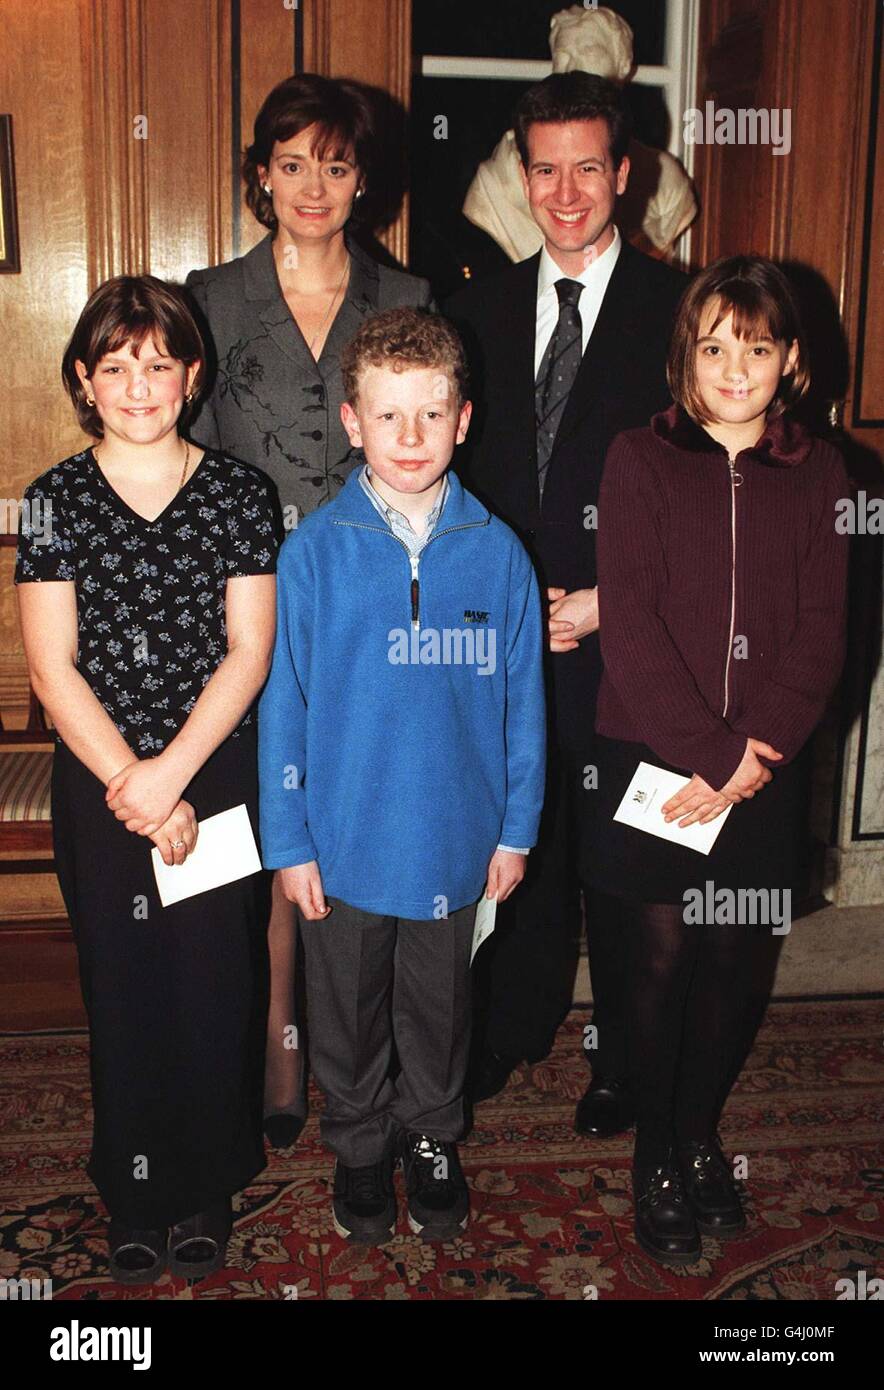 Cherie Blair, wife of British Prime Minister Tony Blair, with Christopher Leslie, MP for Shipley, and children from his constituency (l to r) Catherine Clark, Jonathon Blackburn and Louise Bowmaker, at a tea party hosted by Mrs Blair at 10 Downing Street. Stock Photo